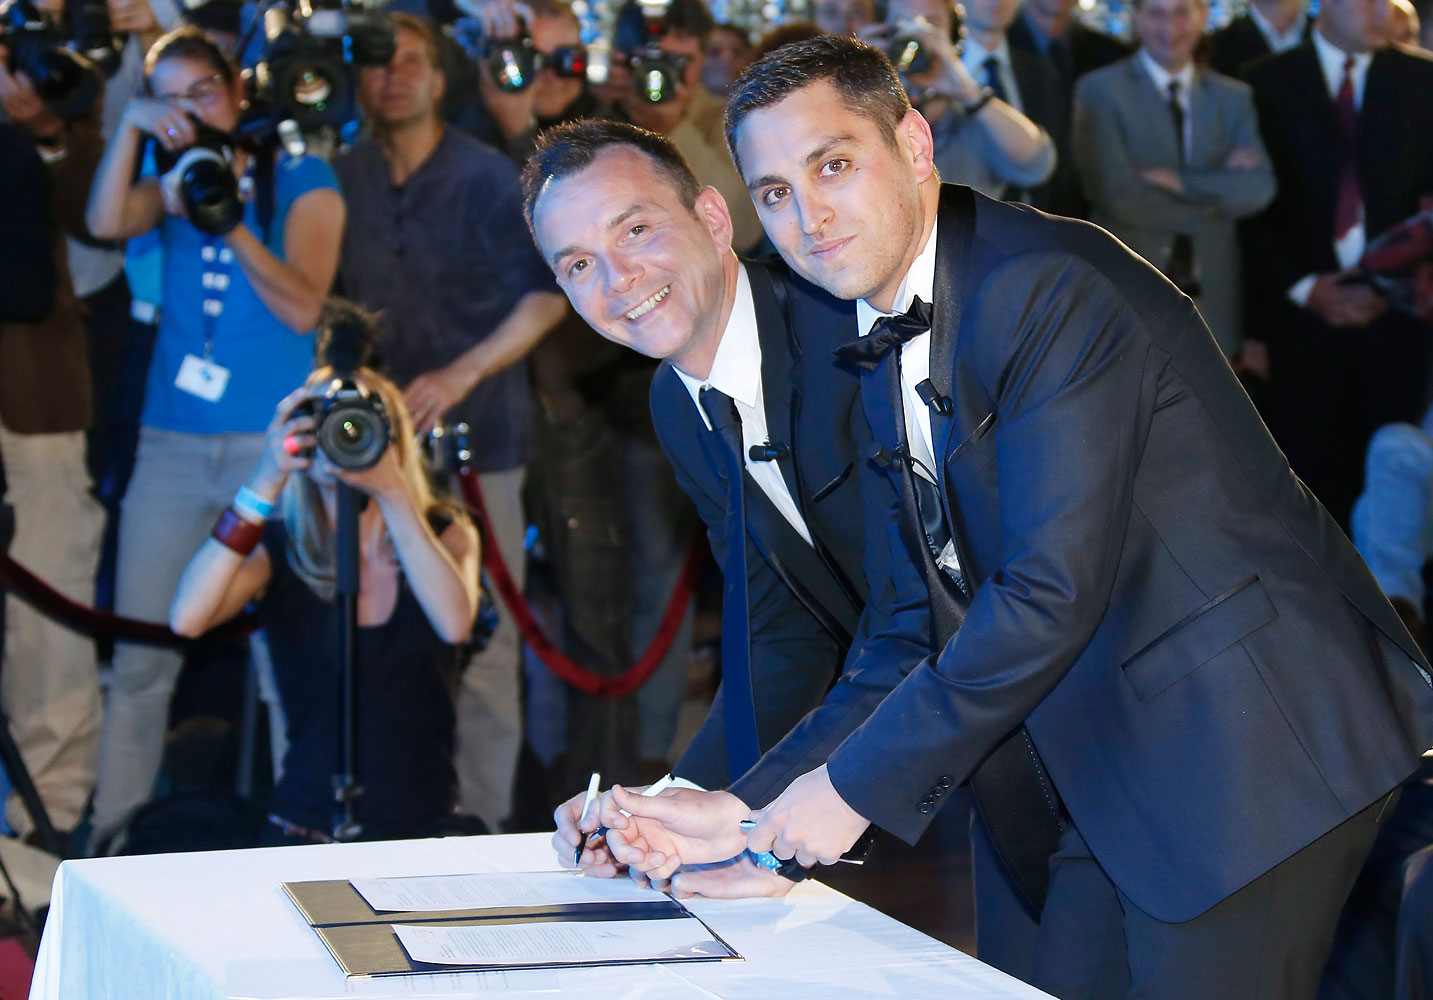 Vincent Autin (L) and his partner Bruno Boileau (R) sign a document during their marriage in Montpellier, southern France on May 29, 2013.